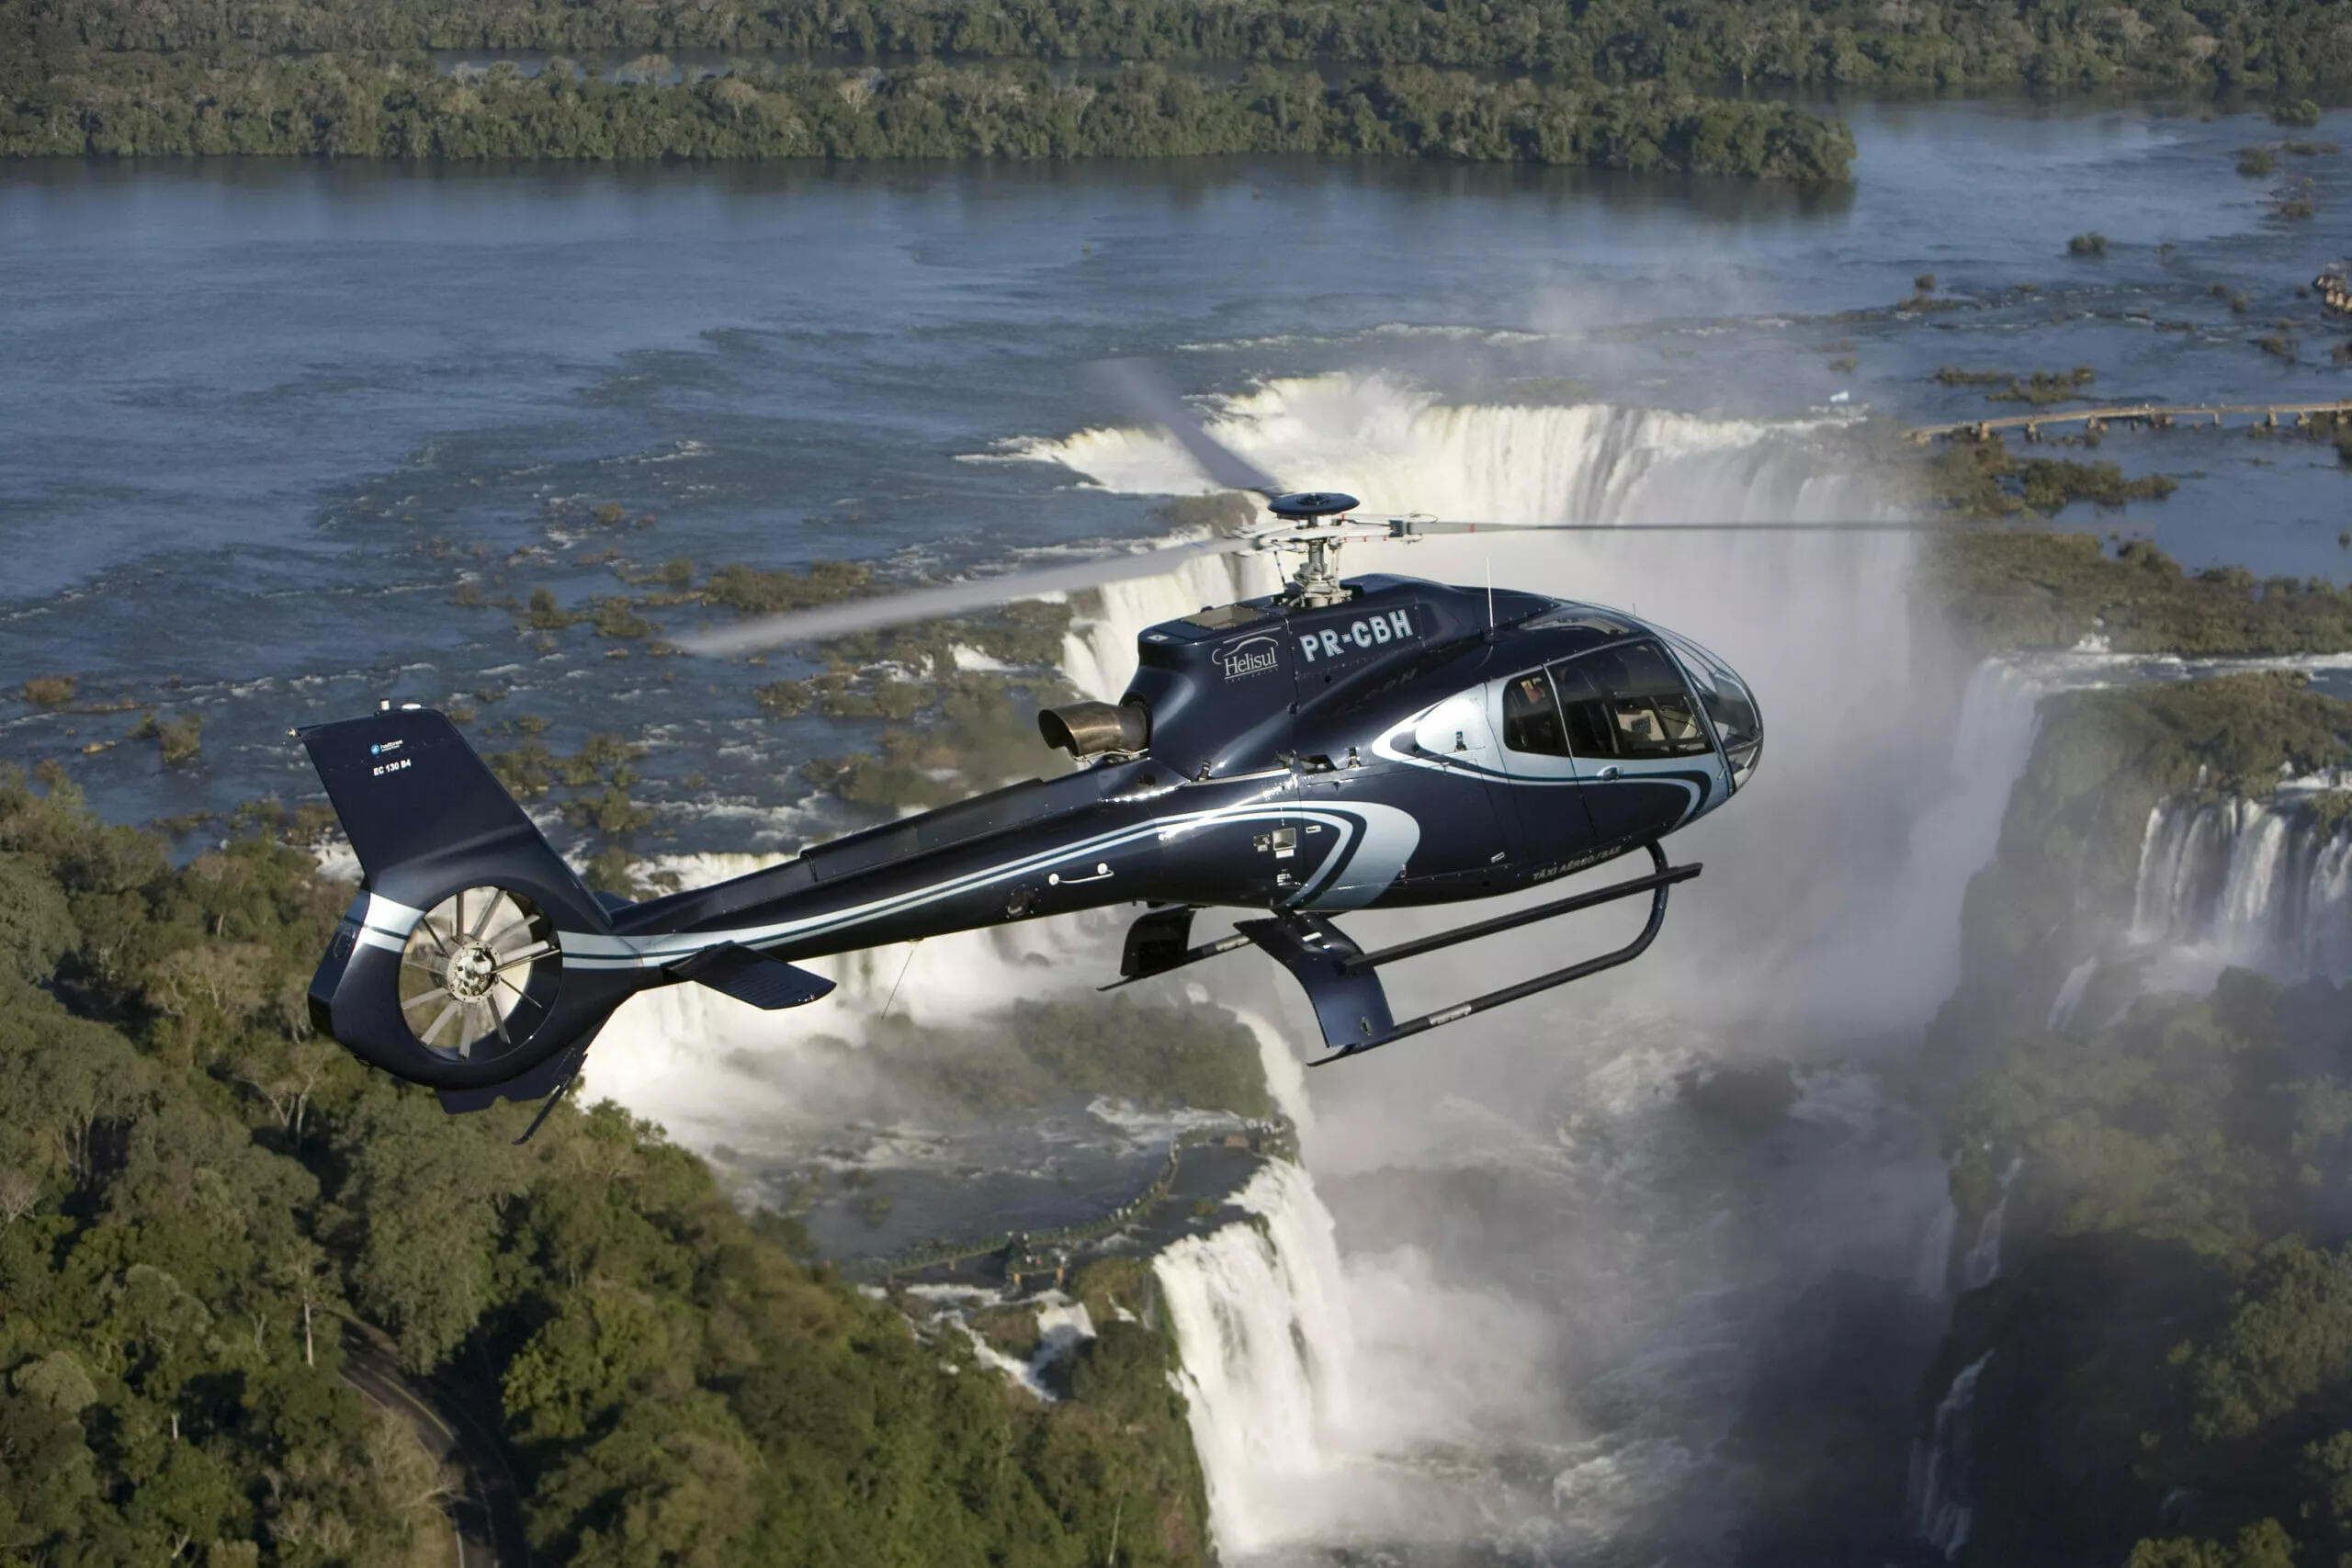 Helisul in Brazil, South America | Helicopter Sport - Rated 1.2